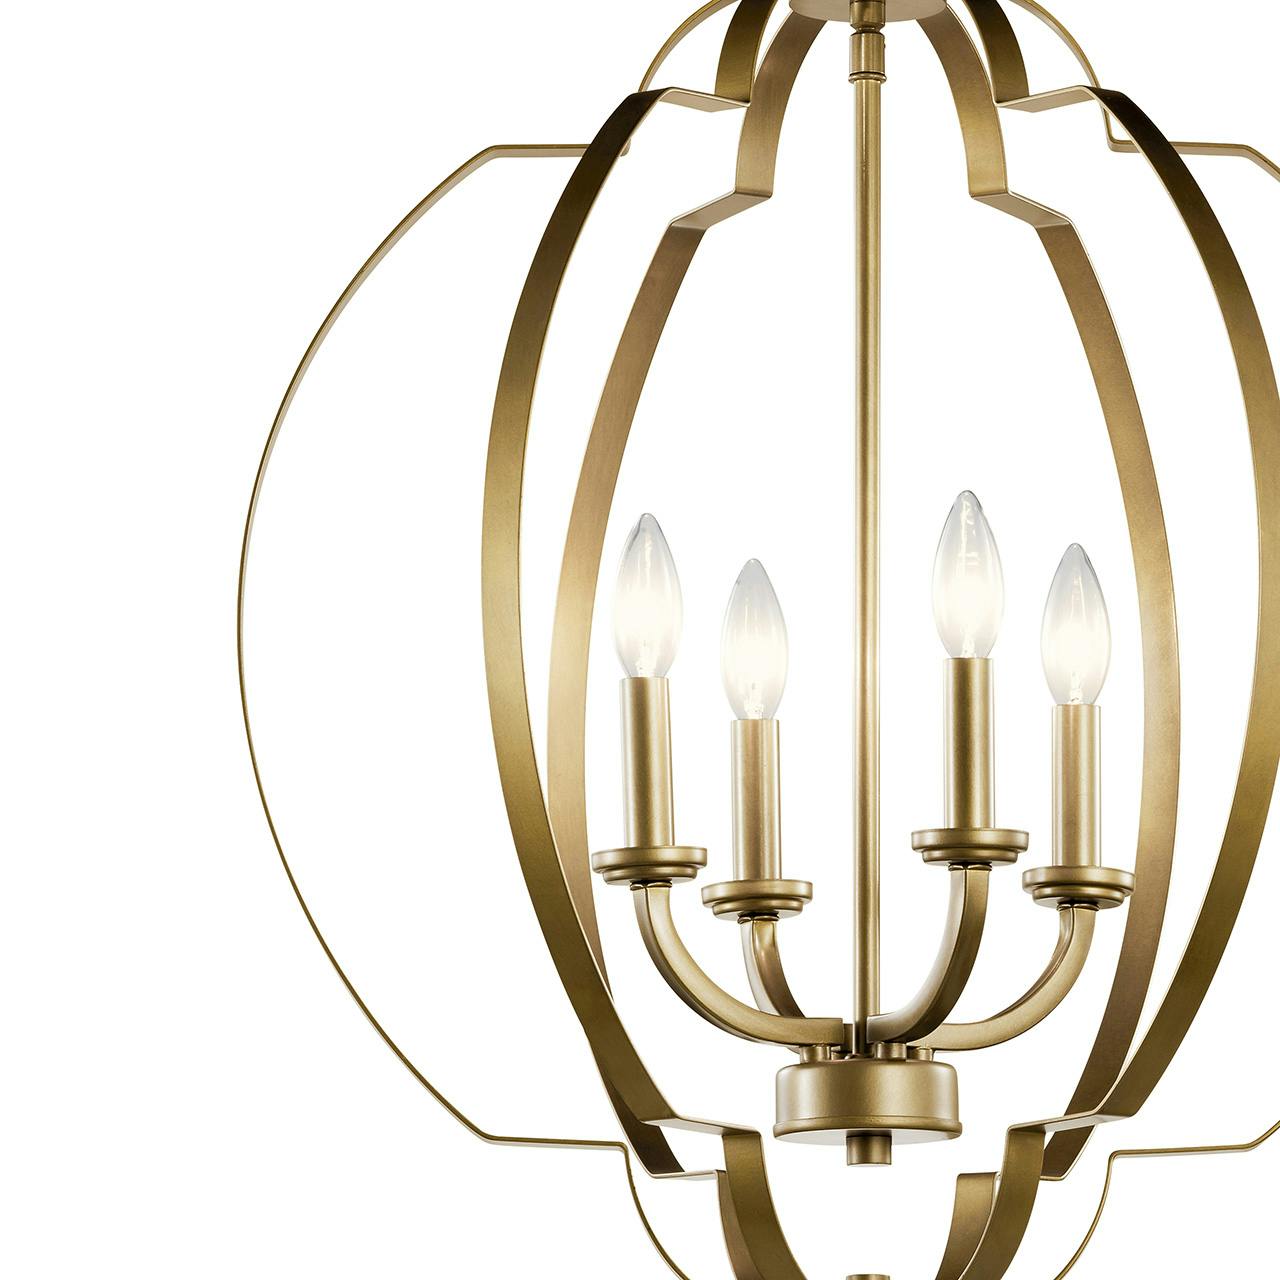 Close up view of the Voleta 26.25" 4 Light Foyer Pendant Brass on a white background